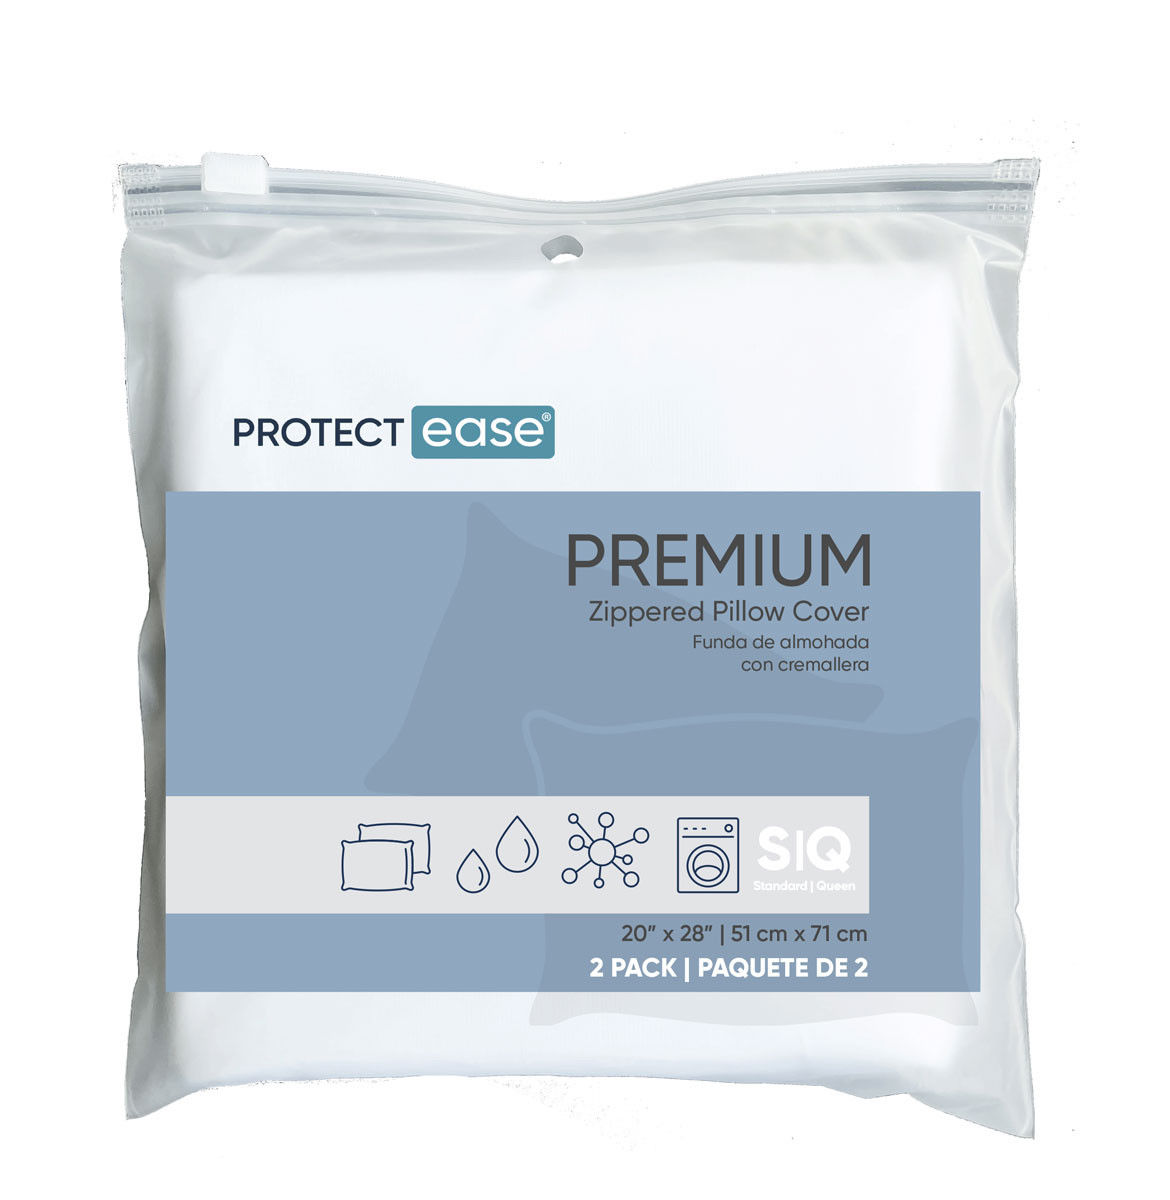 Does the PREMIUM LINE Pillow Cover require special encasements for washing?